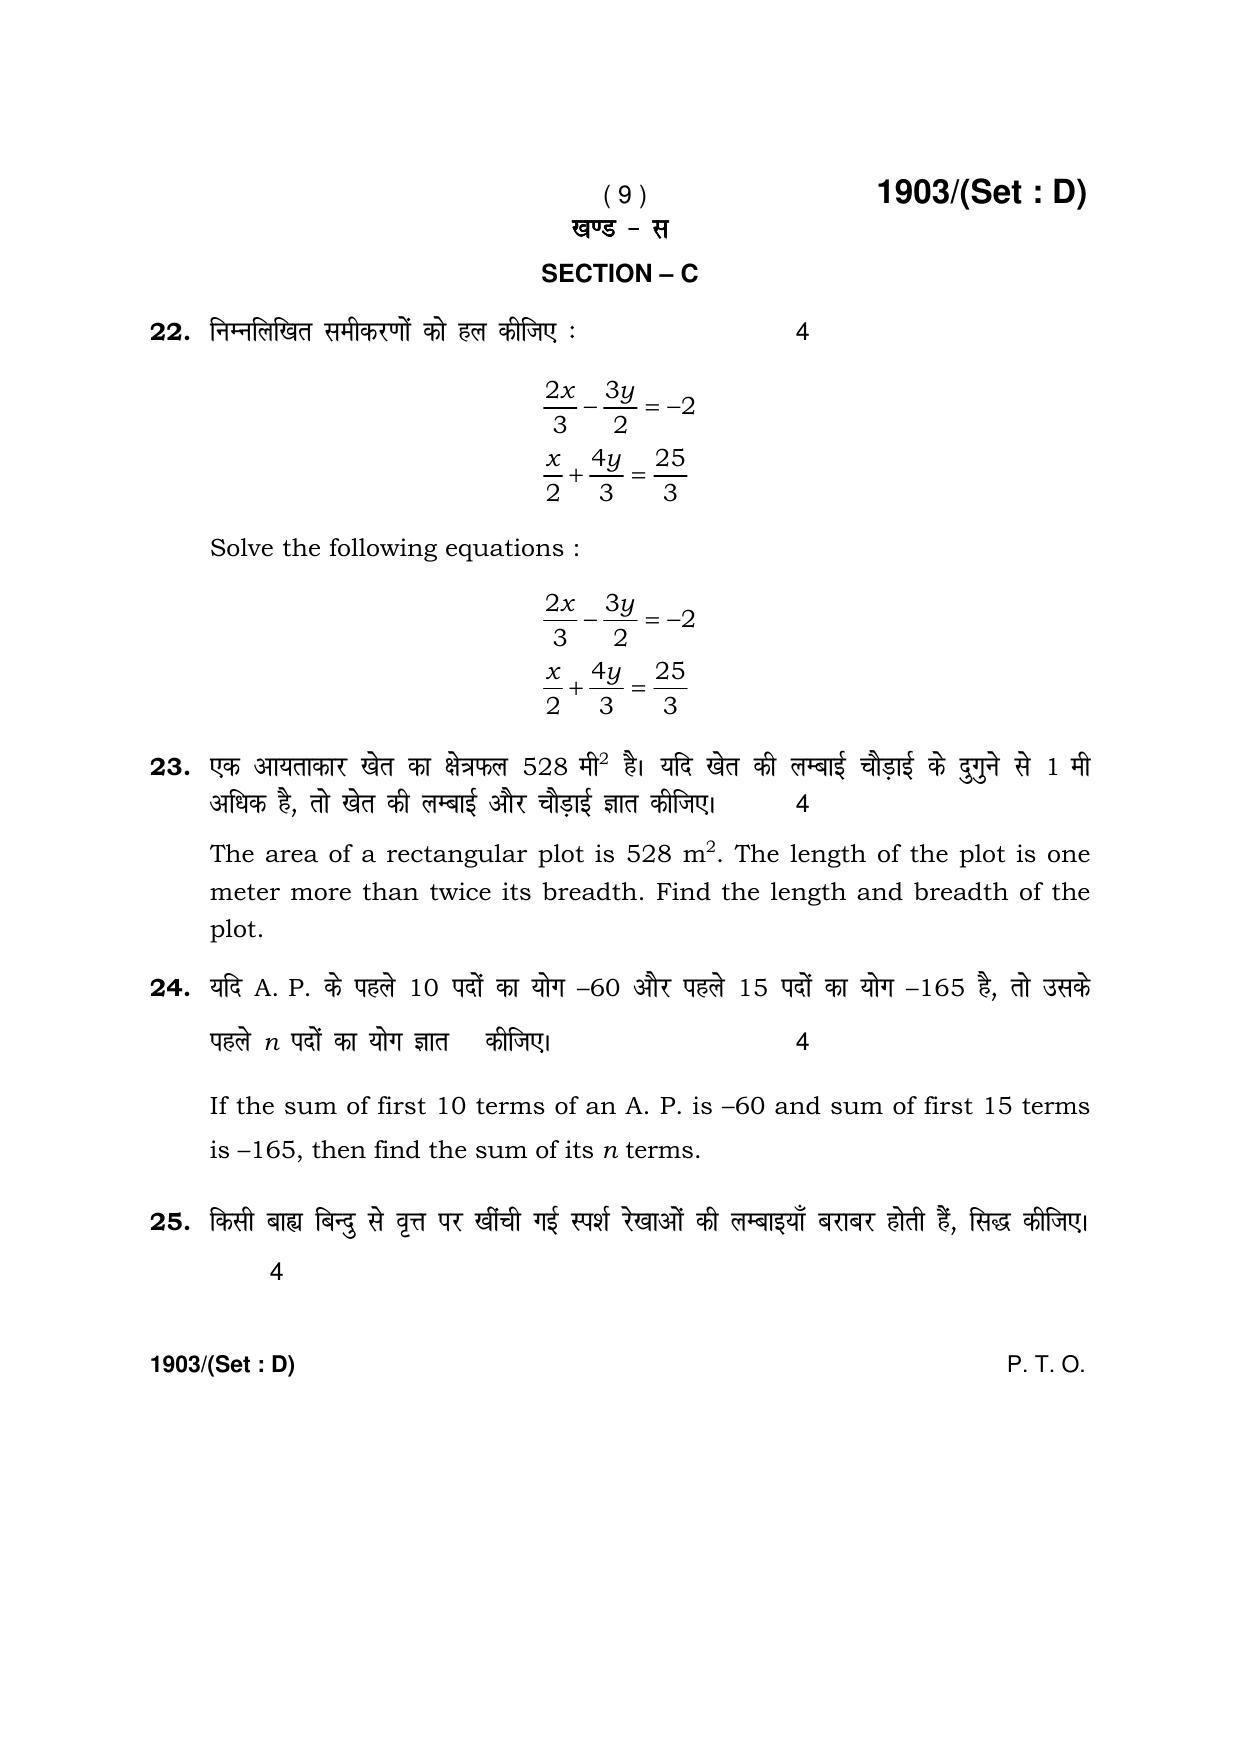 Haryana Board HBSE Class 10 Mathematics -D 2017 Question Paper - Page 9